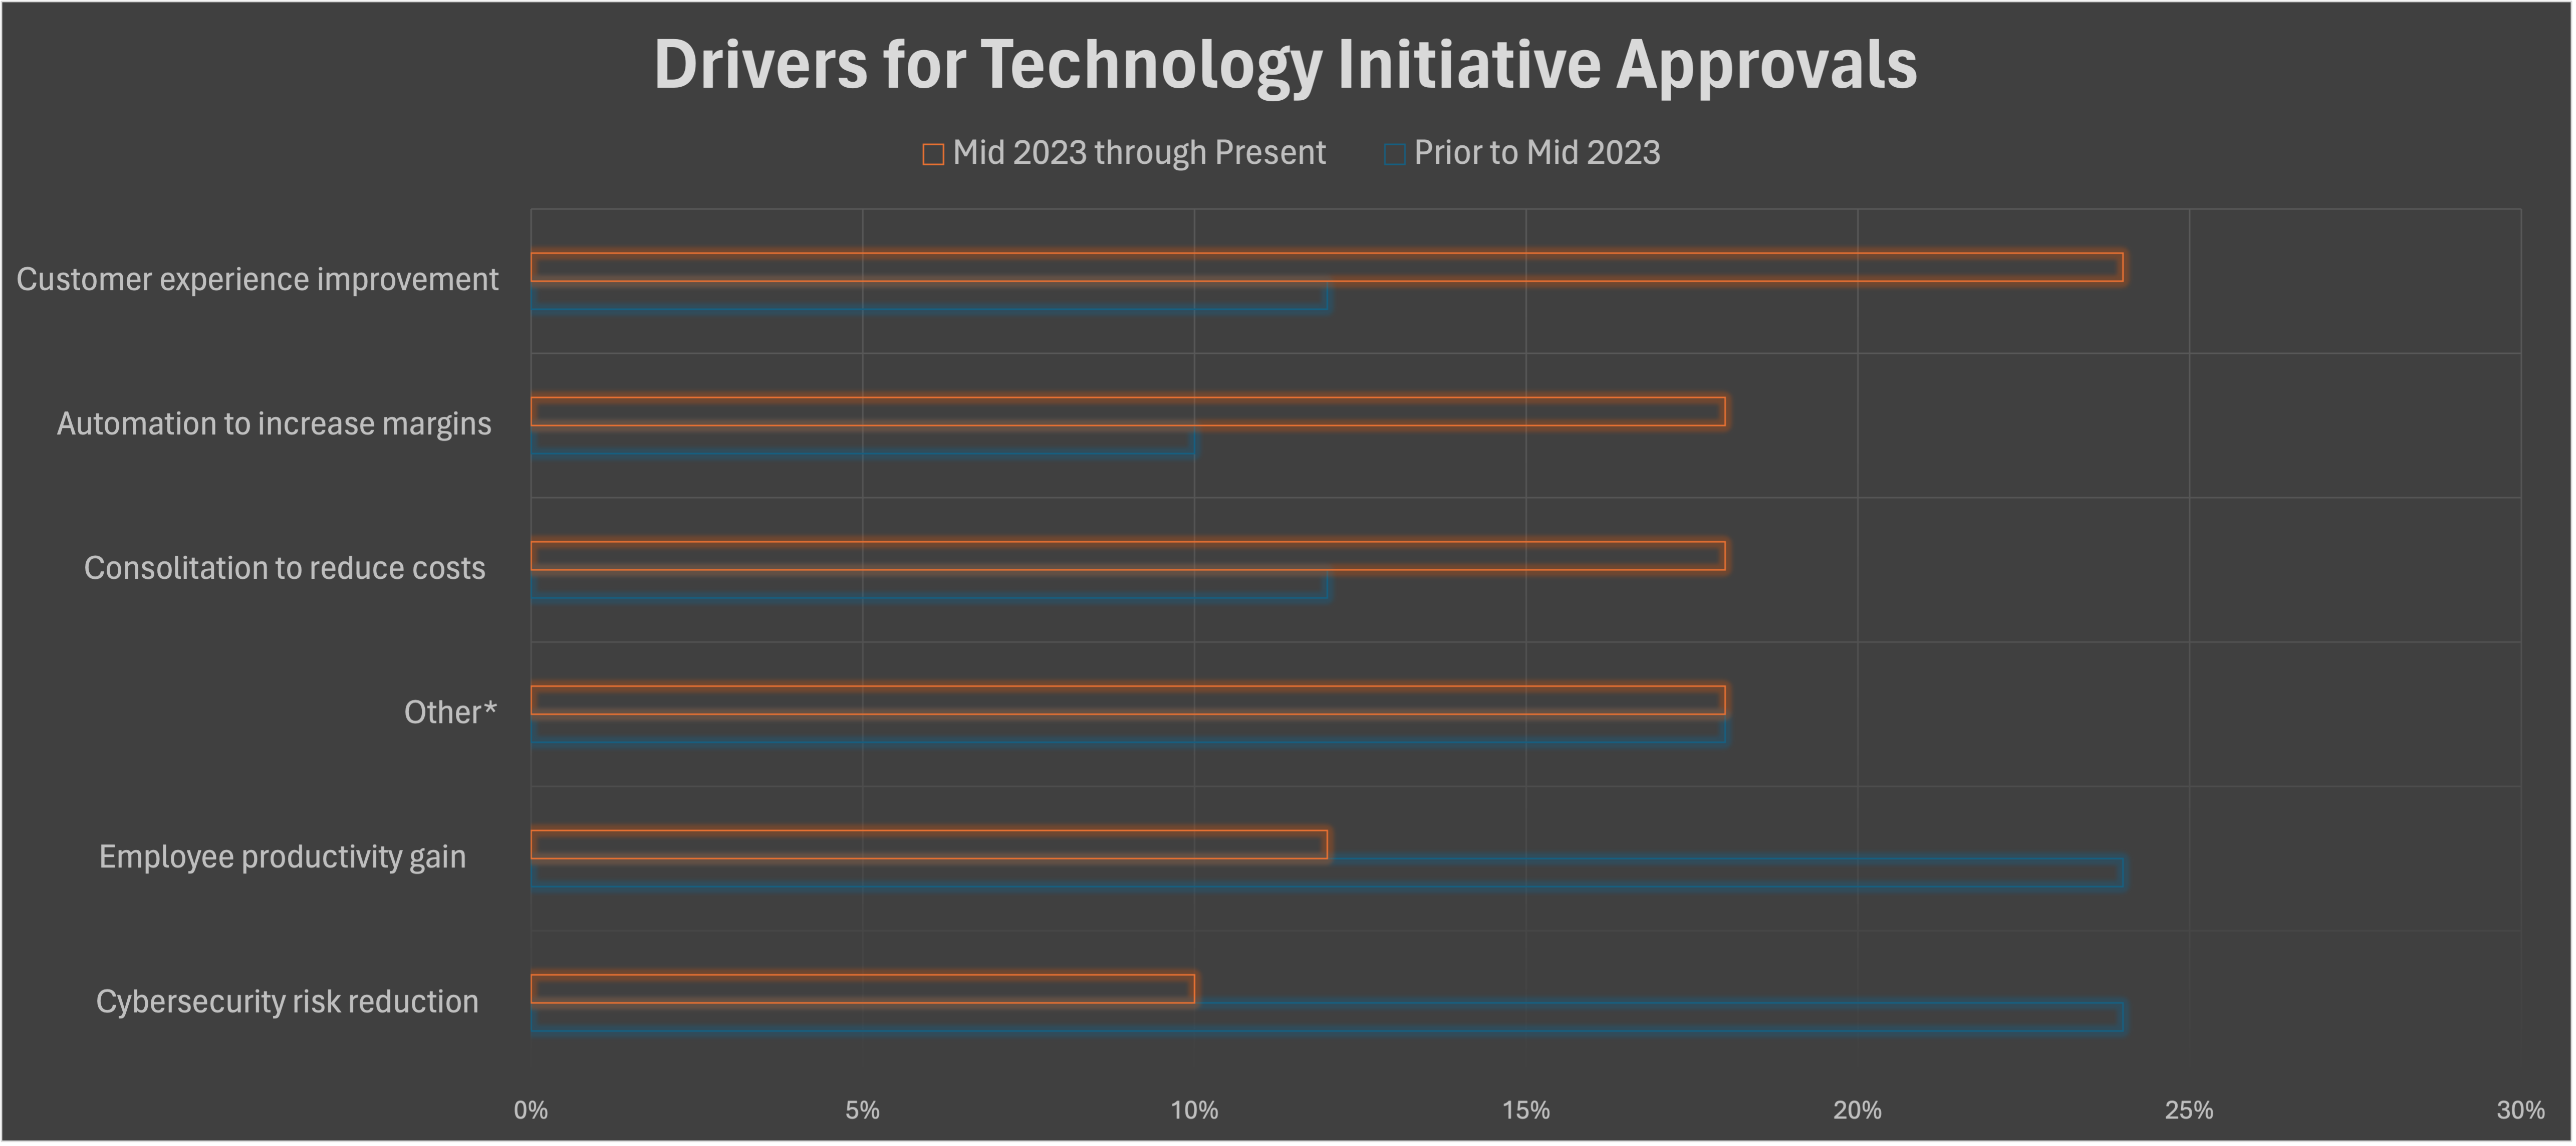 Approvals over time